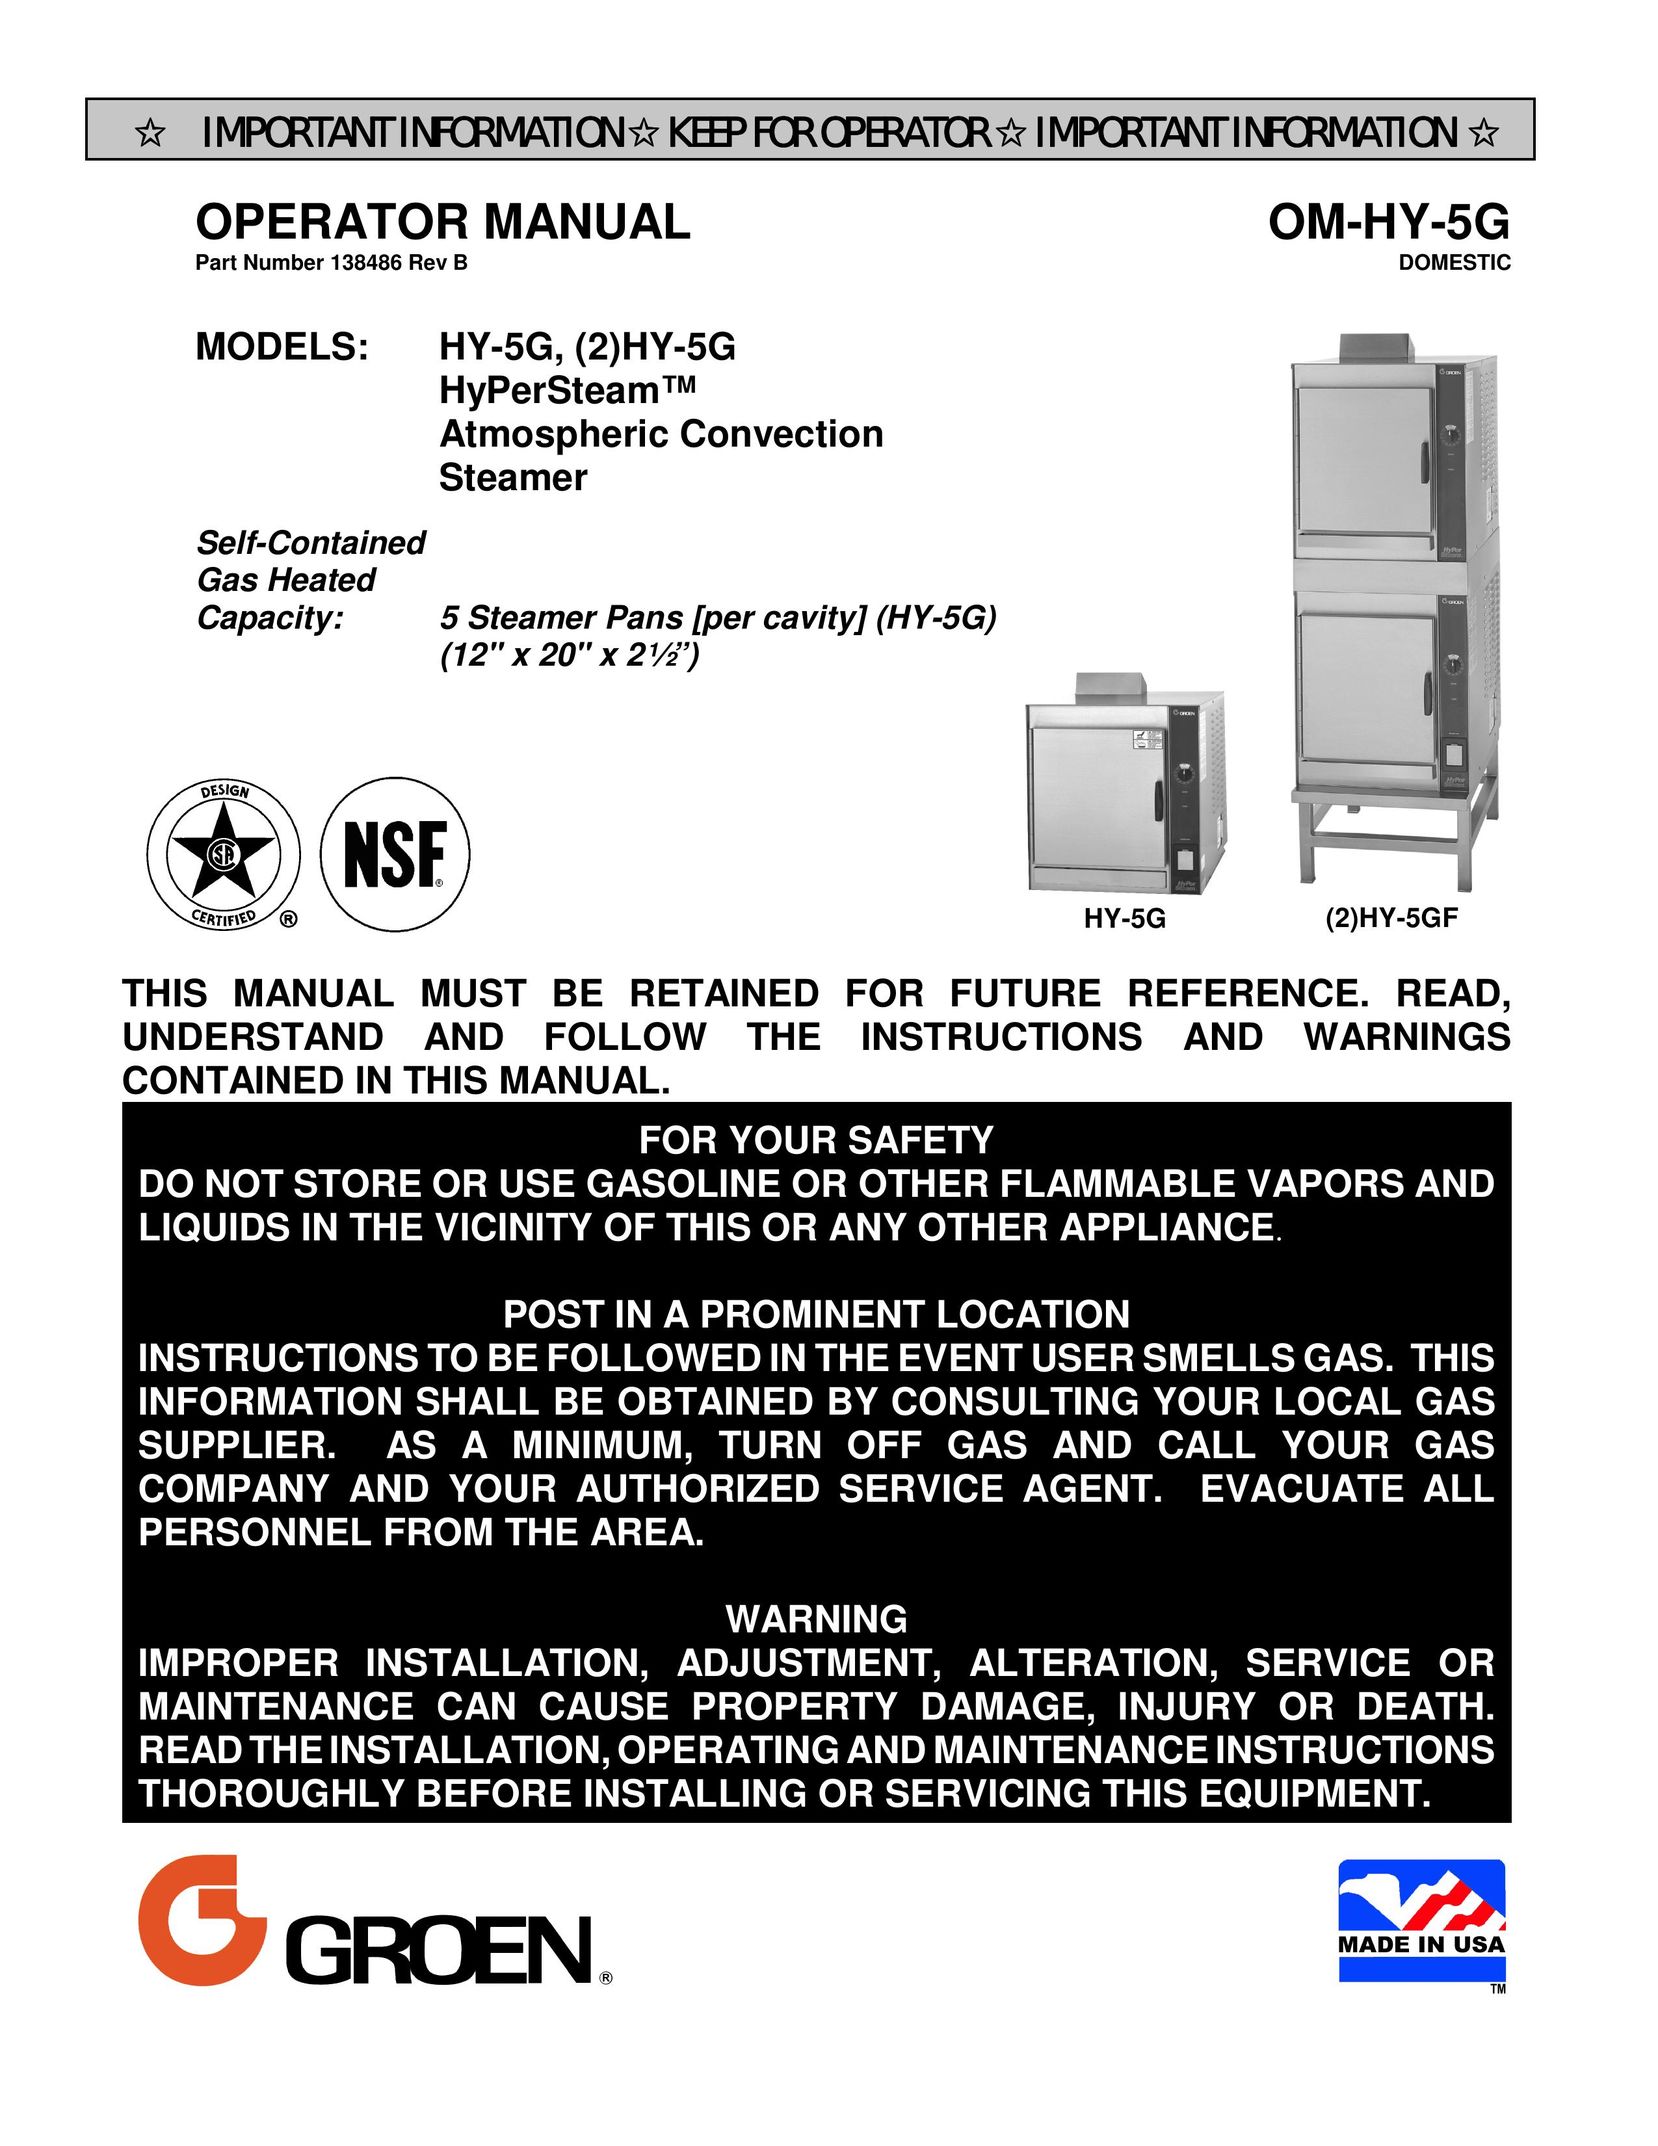 Unified Brands (2)HY-5G Electric Heater User Manual